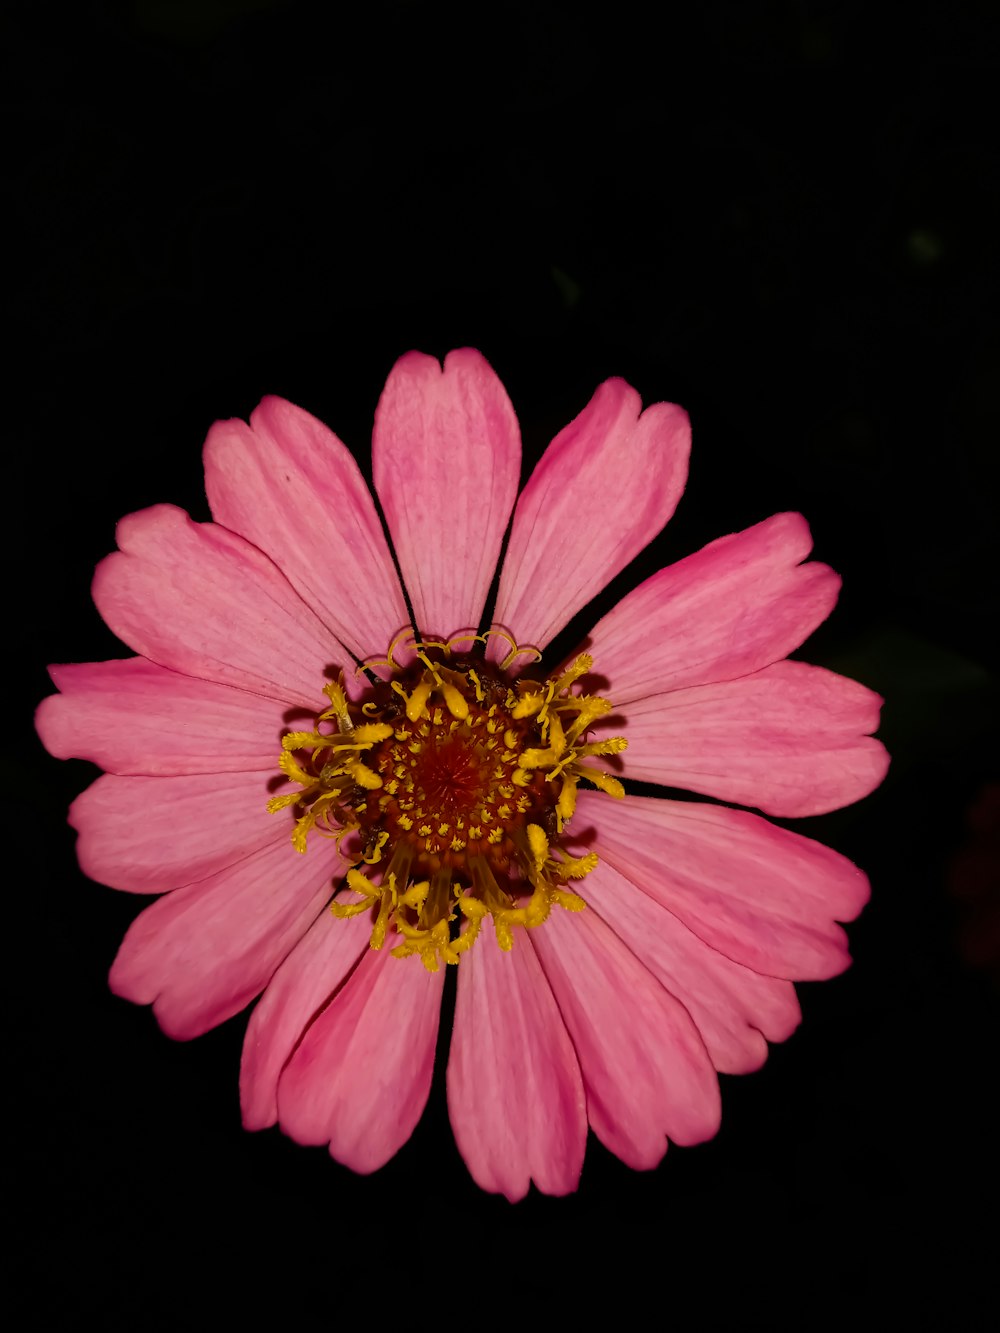 a pink flower with a yellow center on a black background